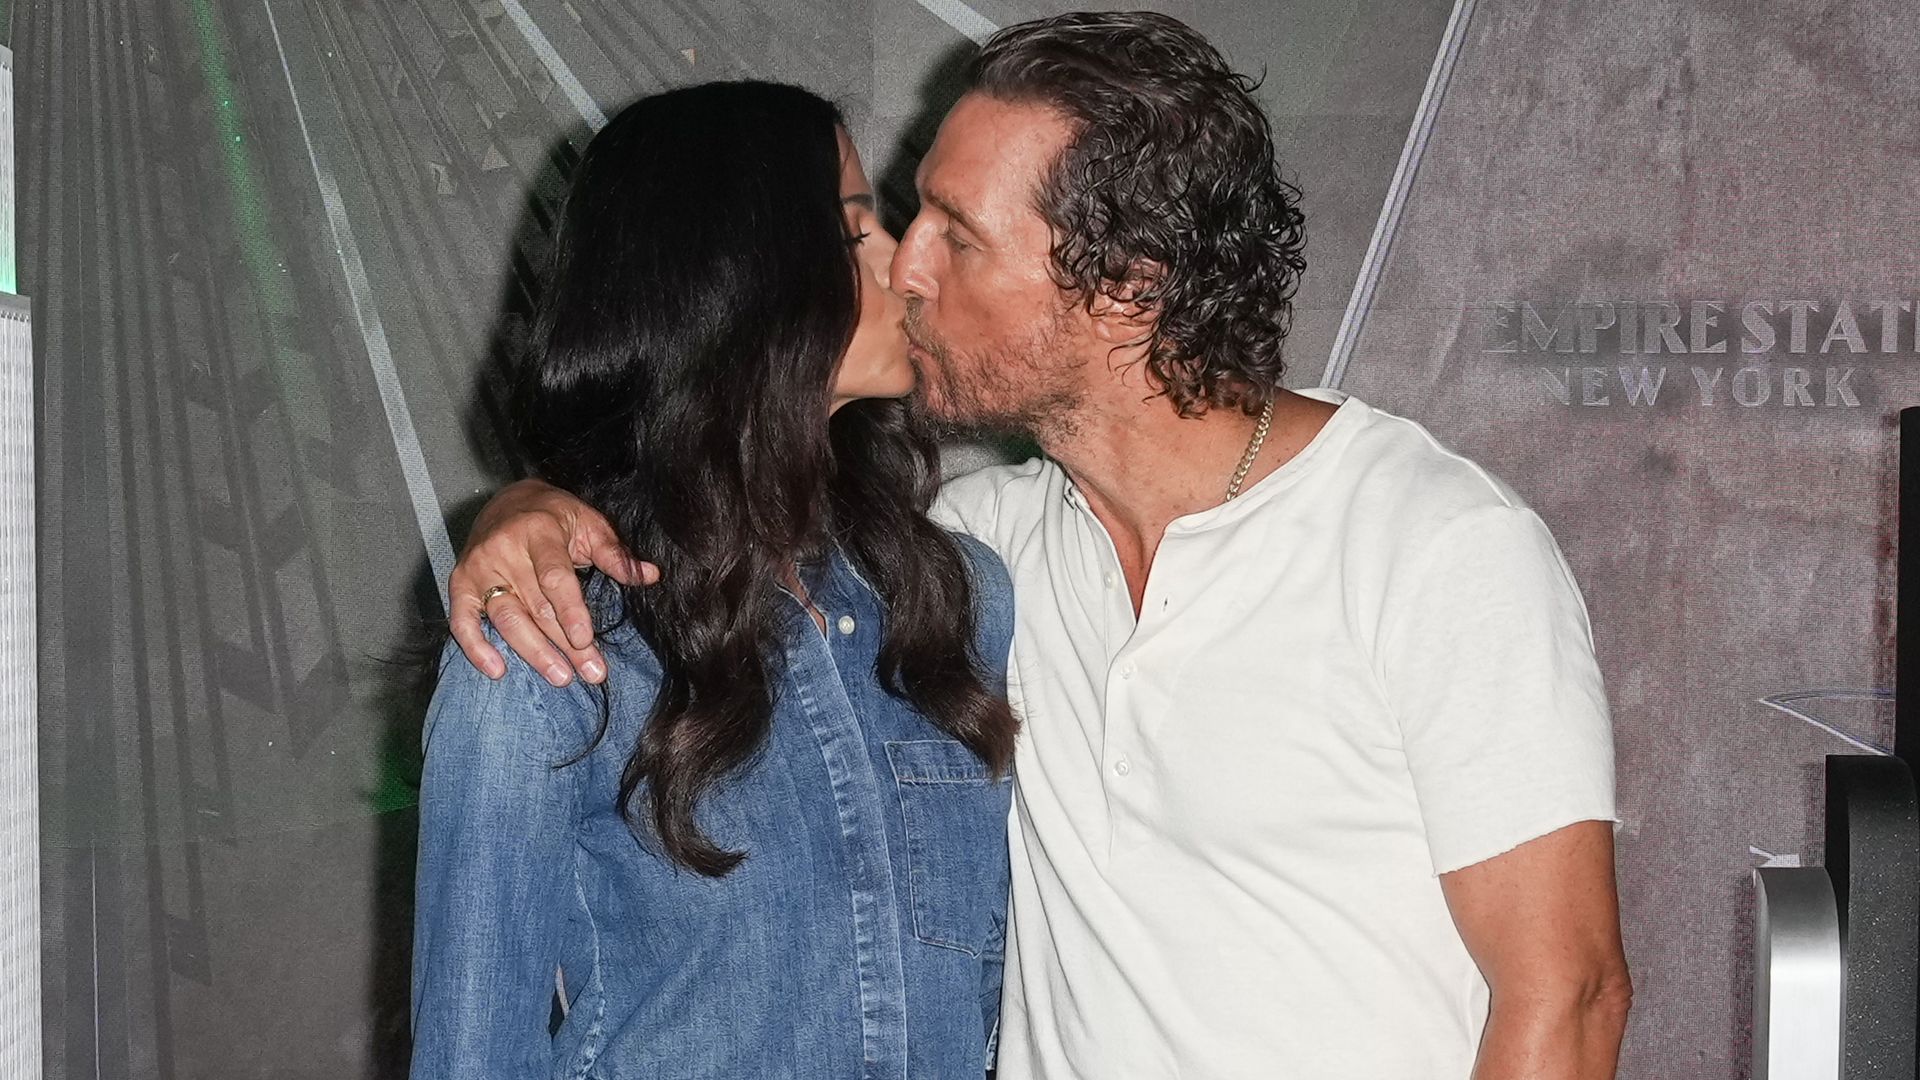 Matthew McConaughey shares touching tribute to wife Camila Alves on their 12th wedding anniversary